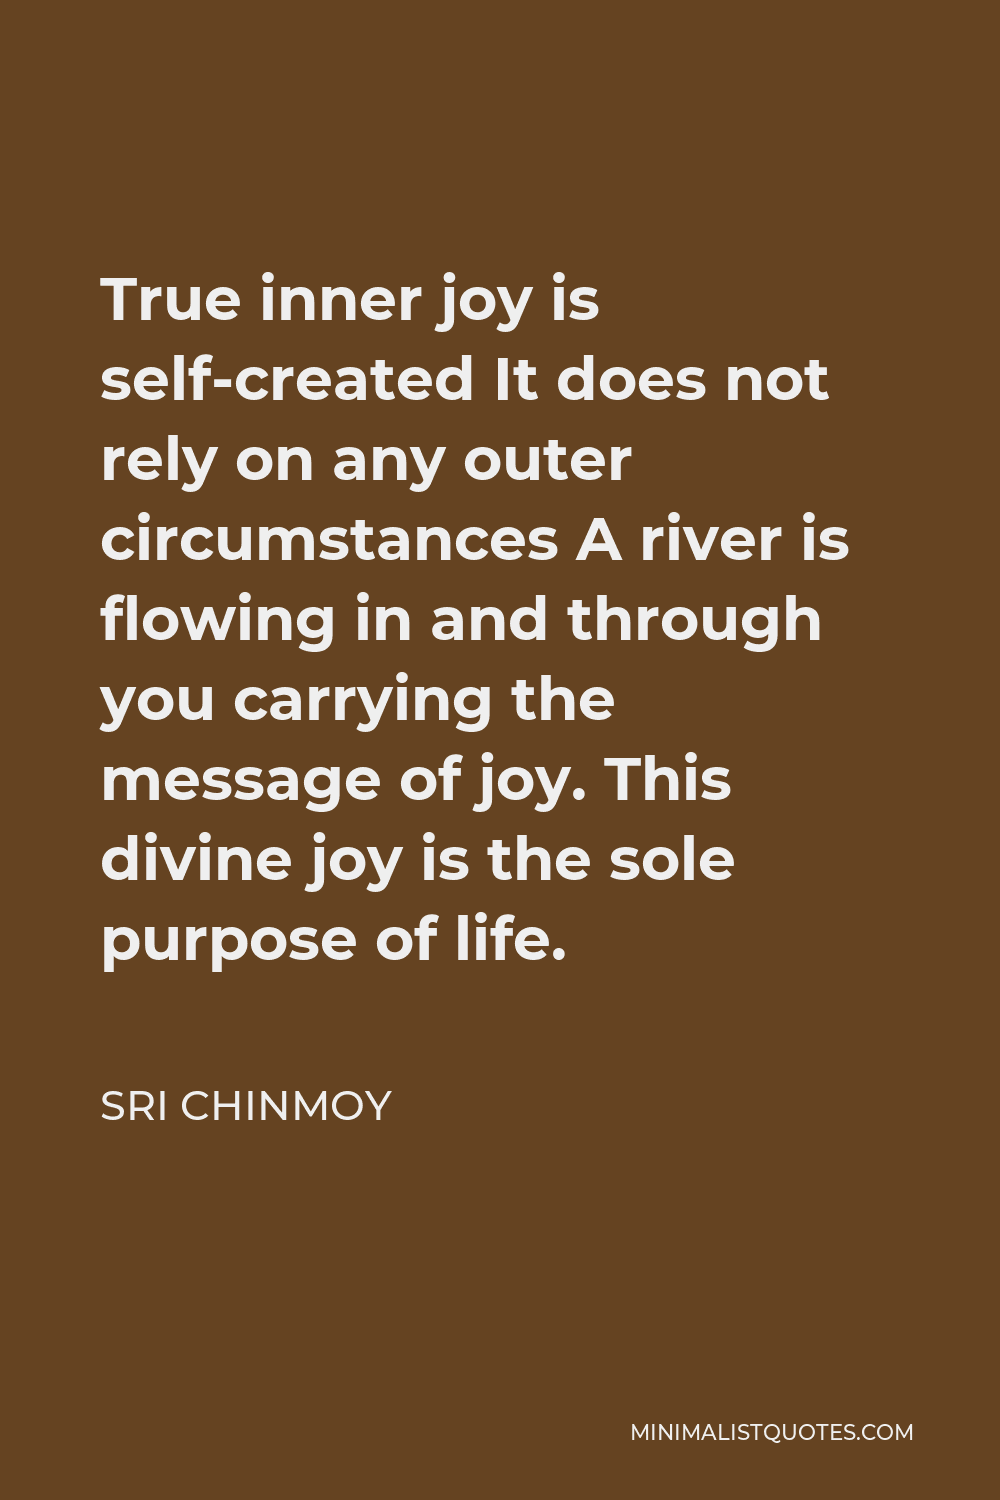 Sri Chinmoy Quote - True inner joy is self-created It does not rely on any outer circumstances A river is flowing in and through you carrying the message of joy. This divine joy is the sole purpose of life.